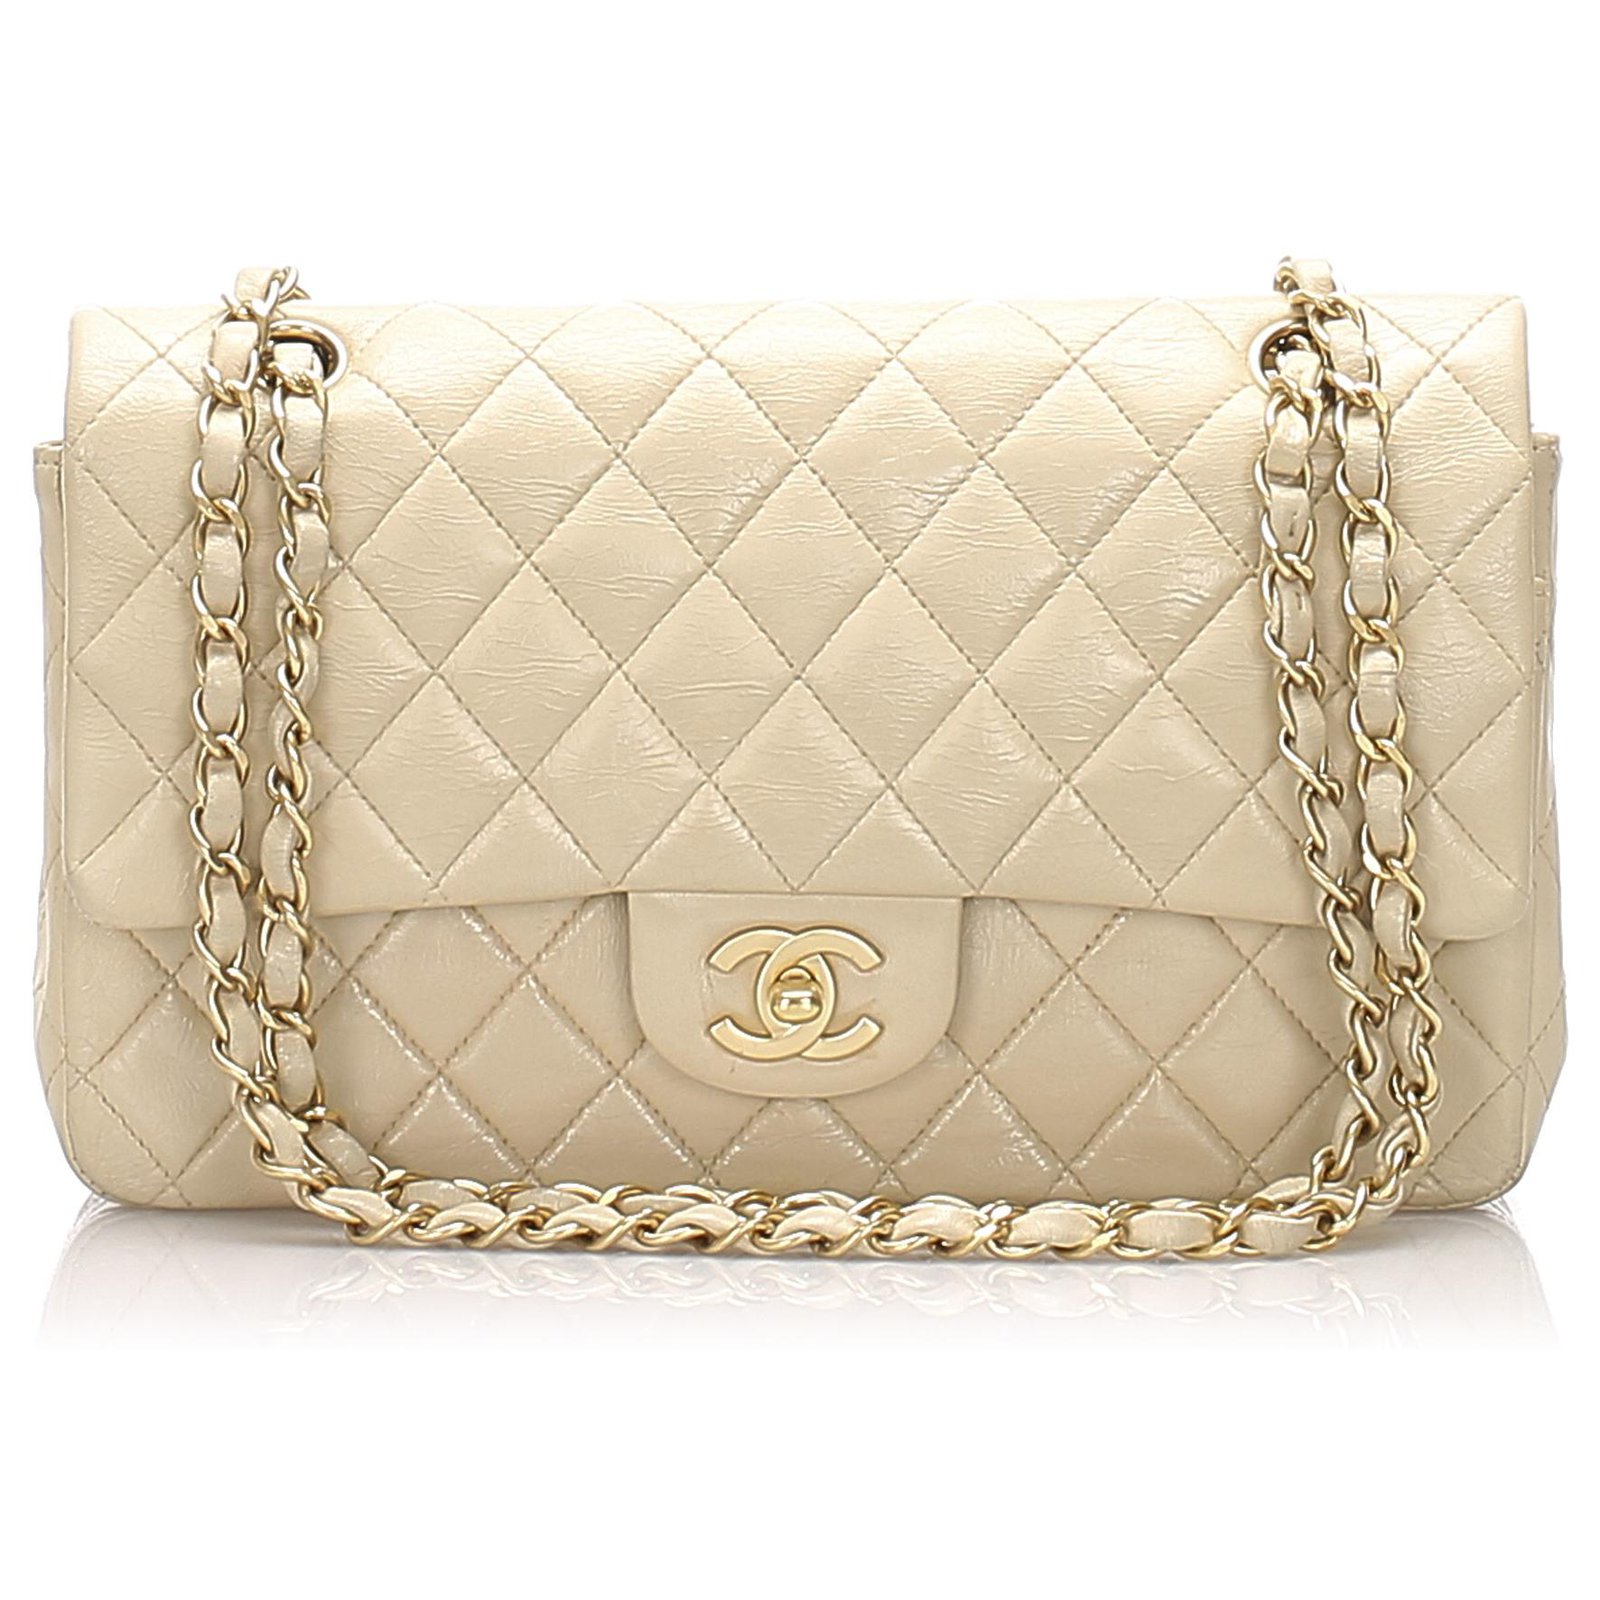 Chanel Brown Medium Classic Lambskin lined Flap Bag Beige Leather